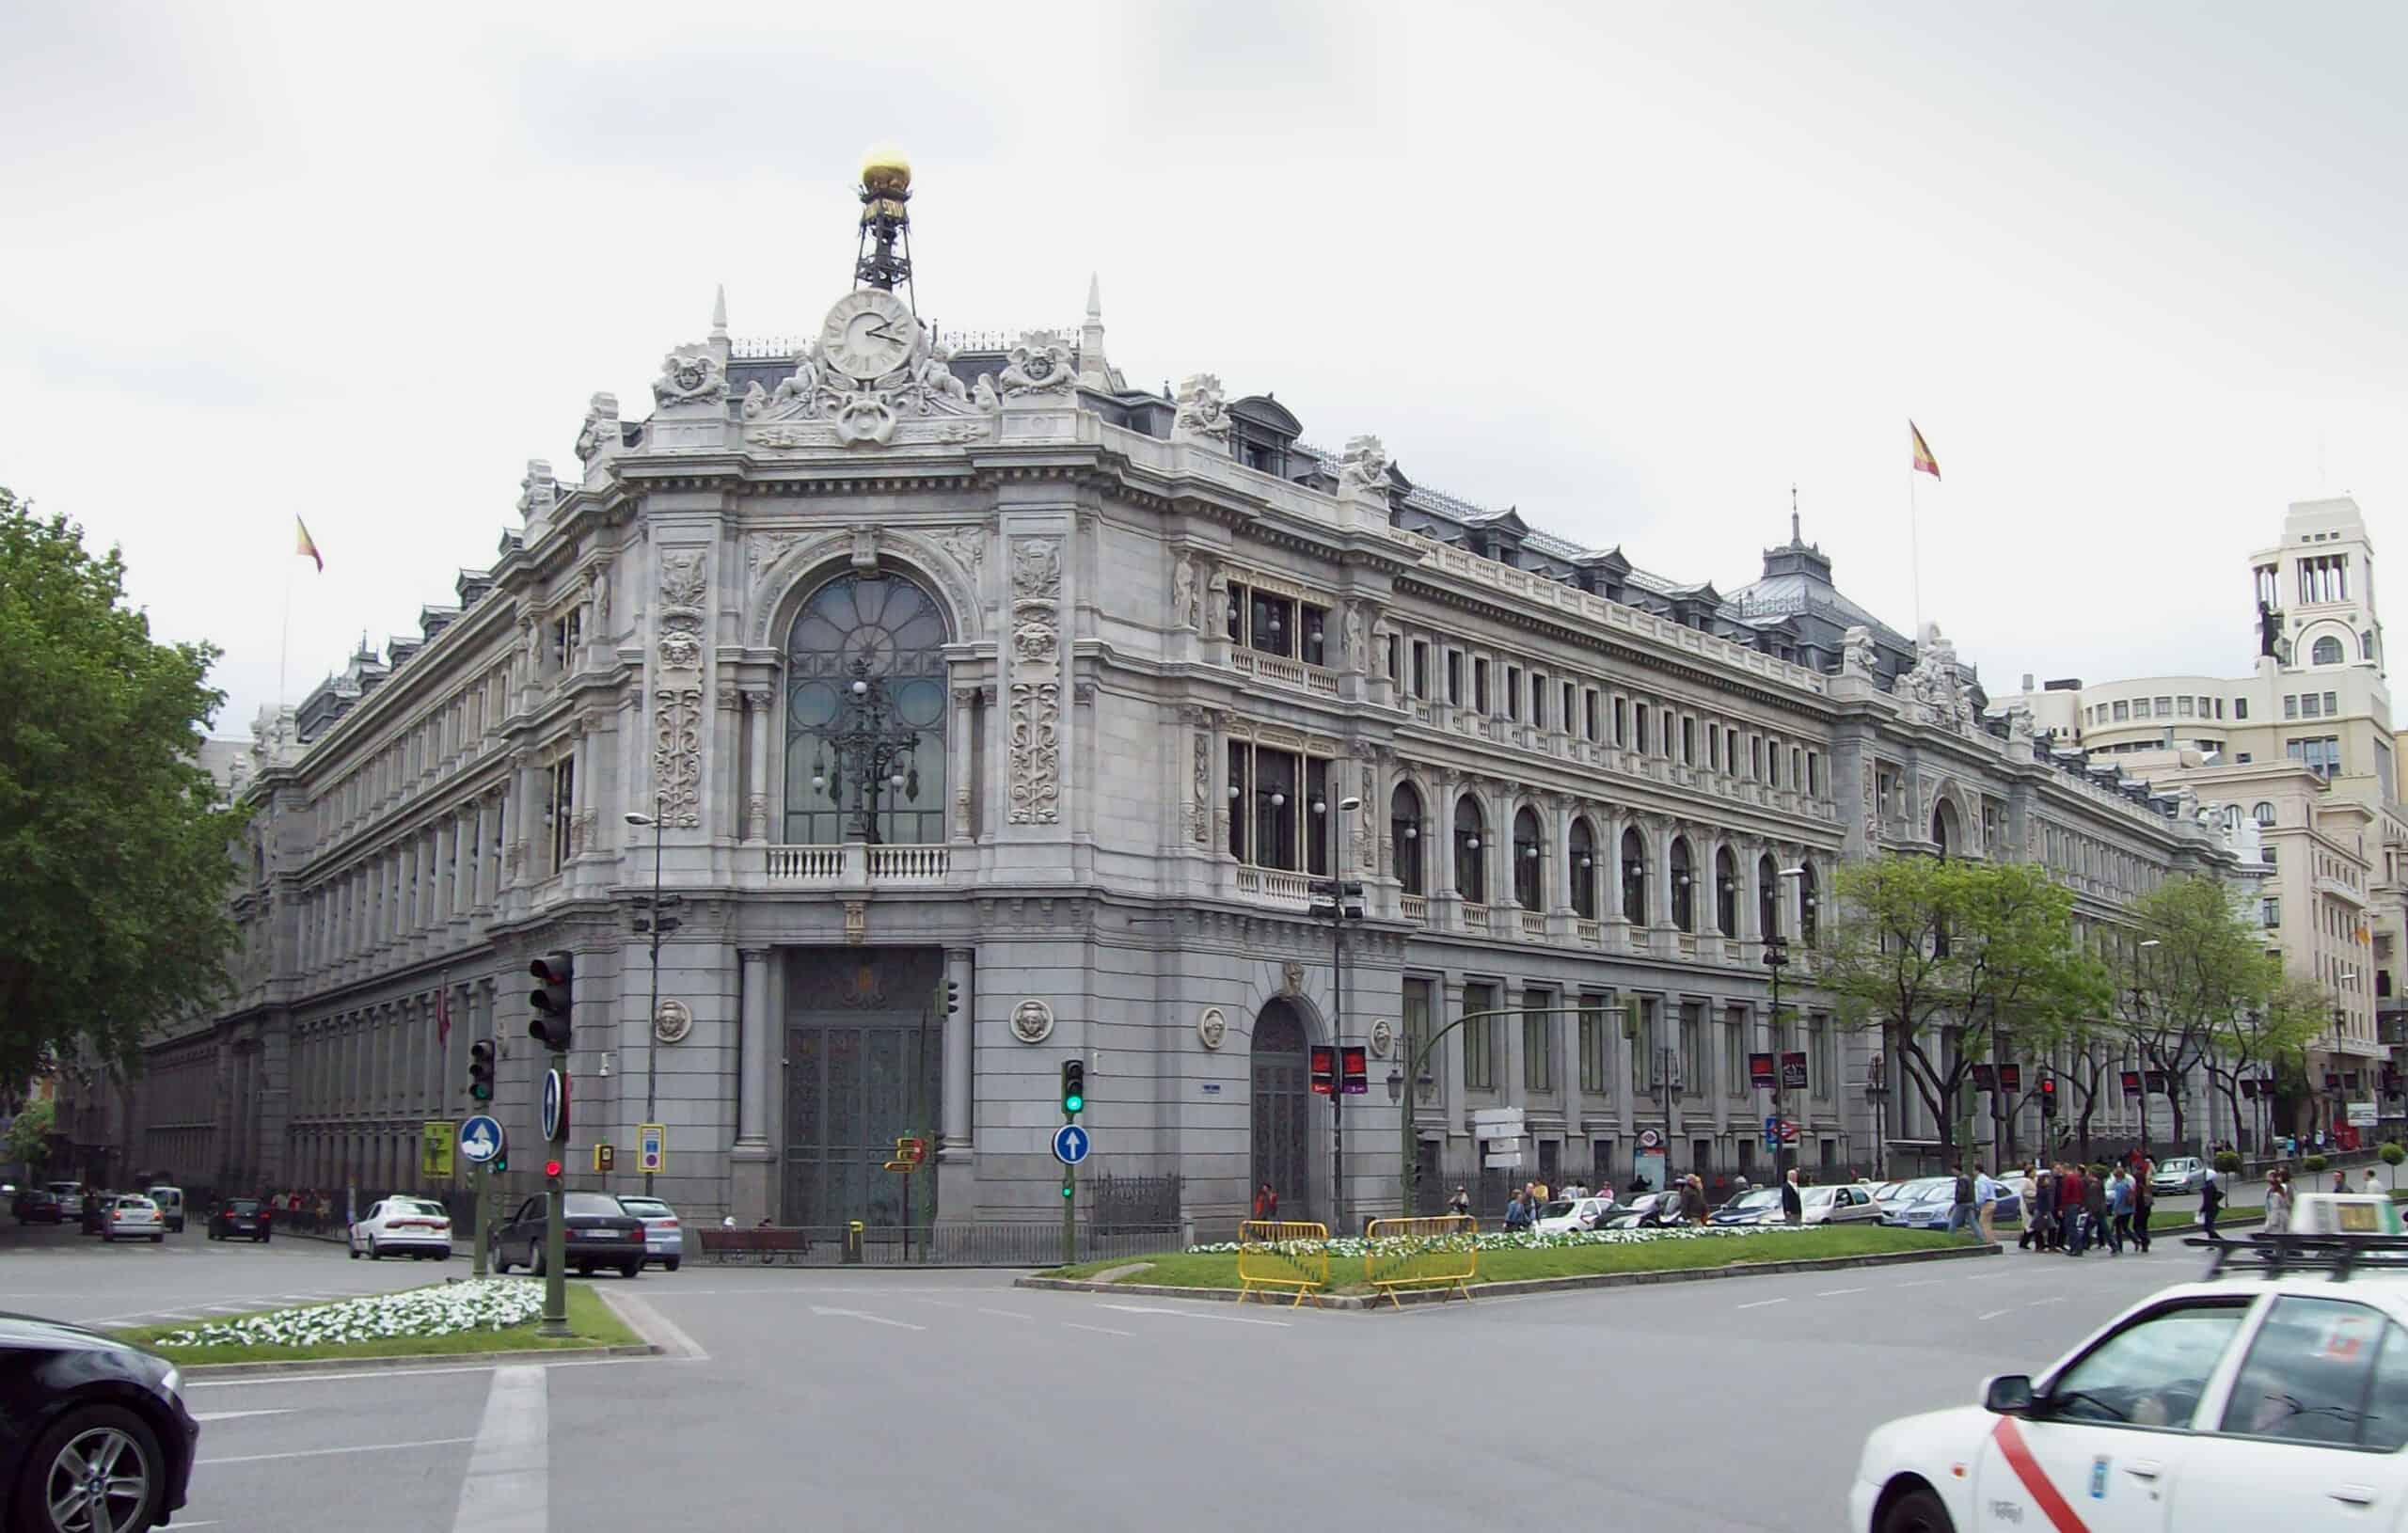 Central bank of Spain